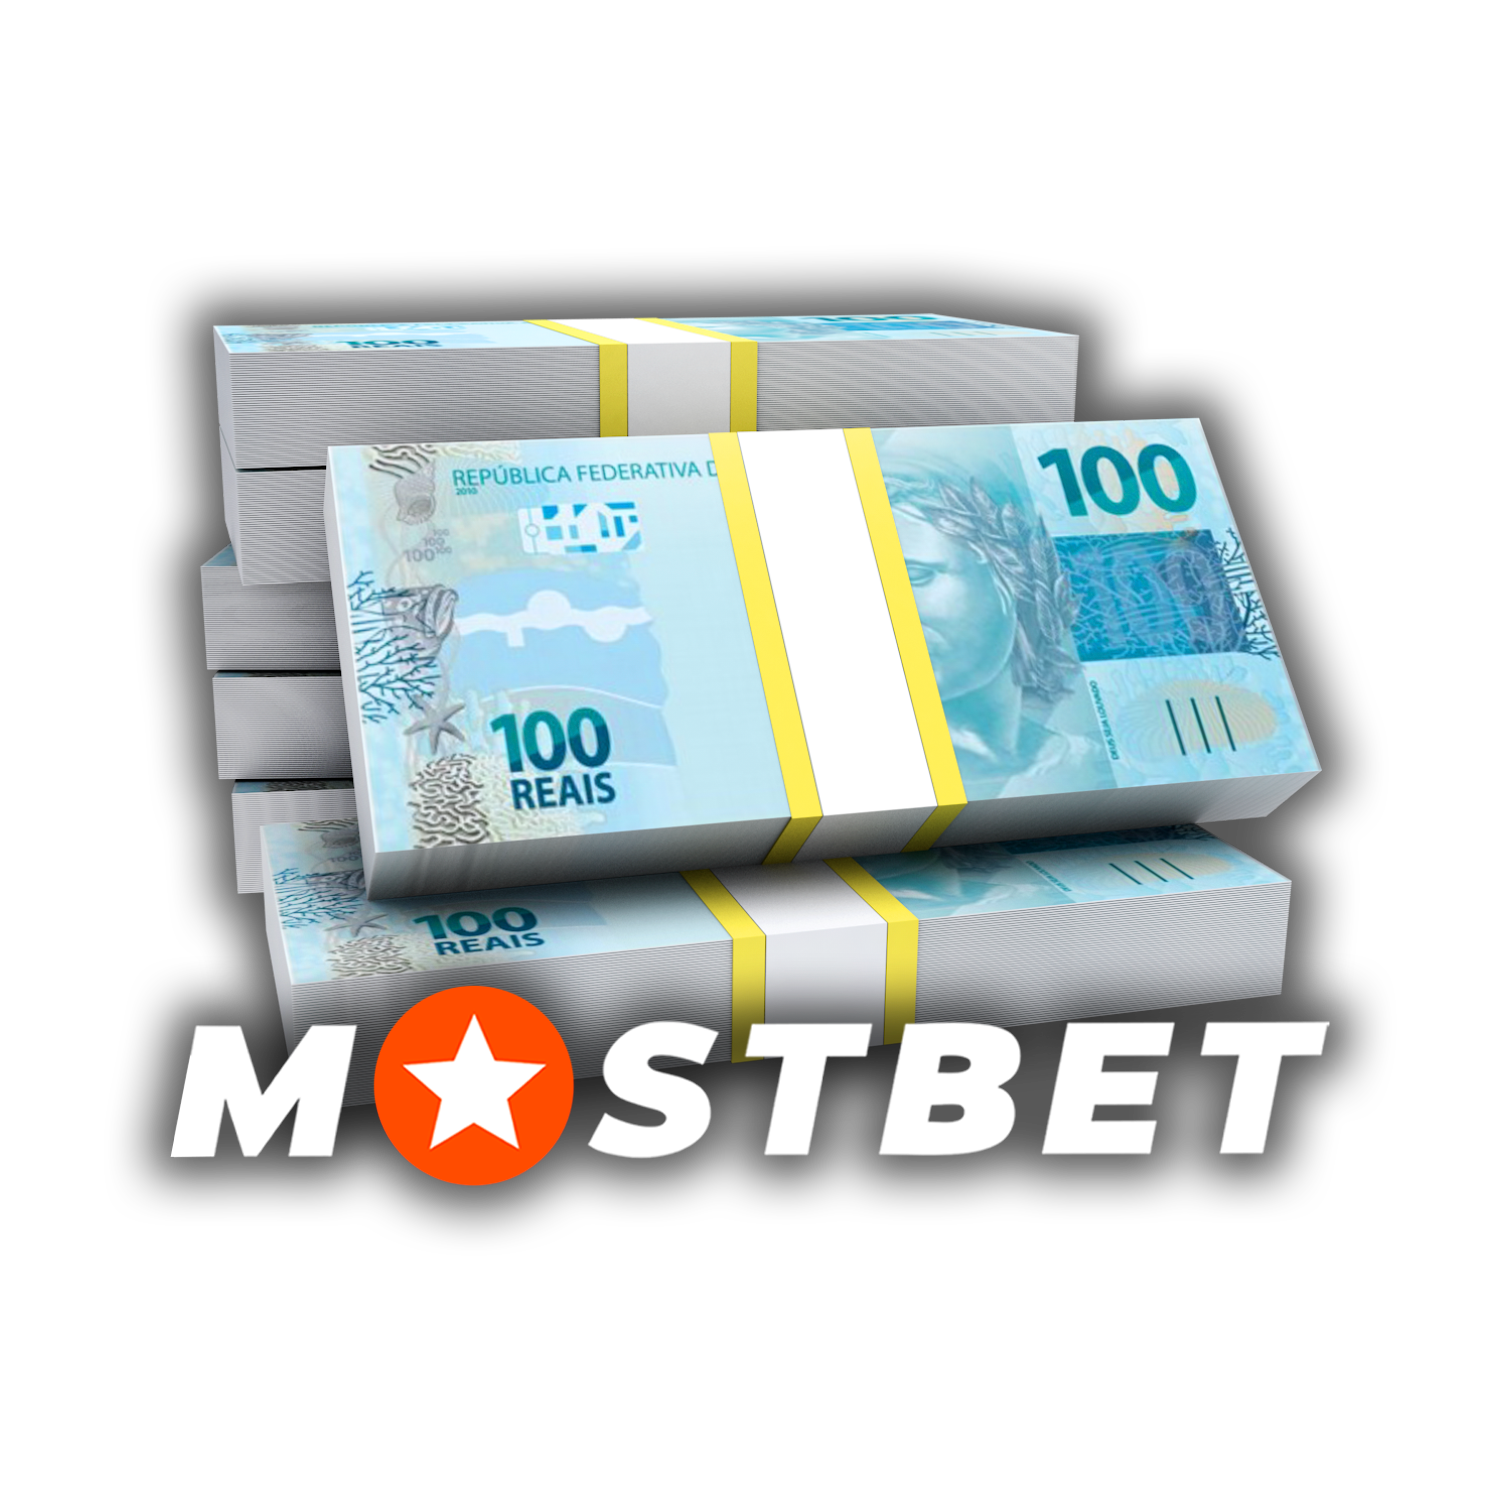 Believing Any Of These 10 Myths About Mostbet app for Android and iOS in India Keeps You From Growing